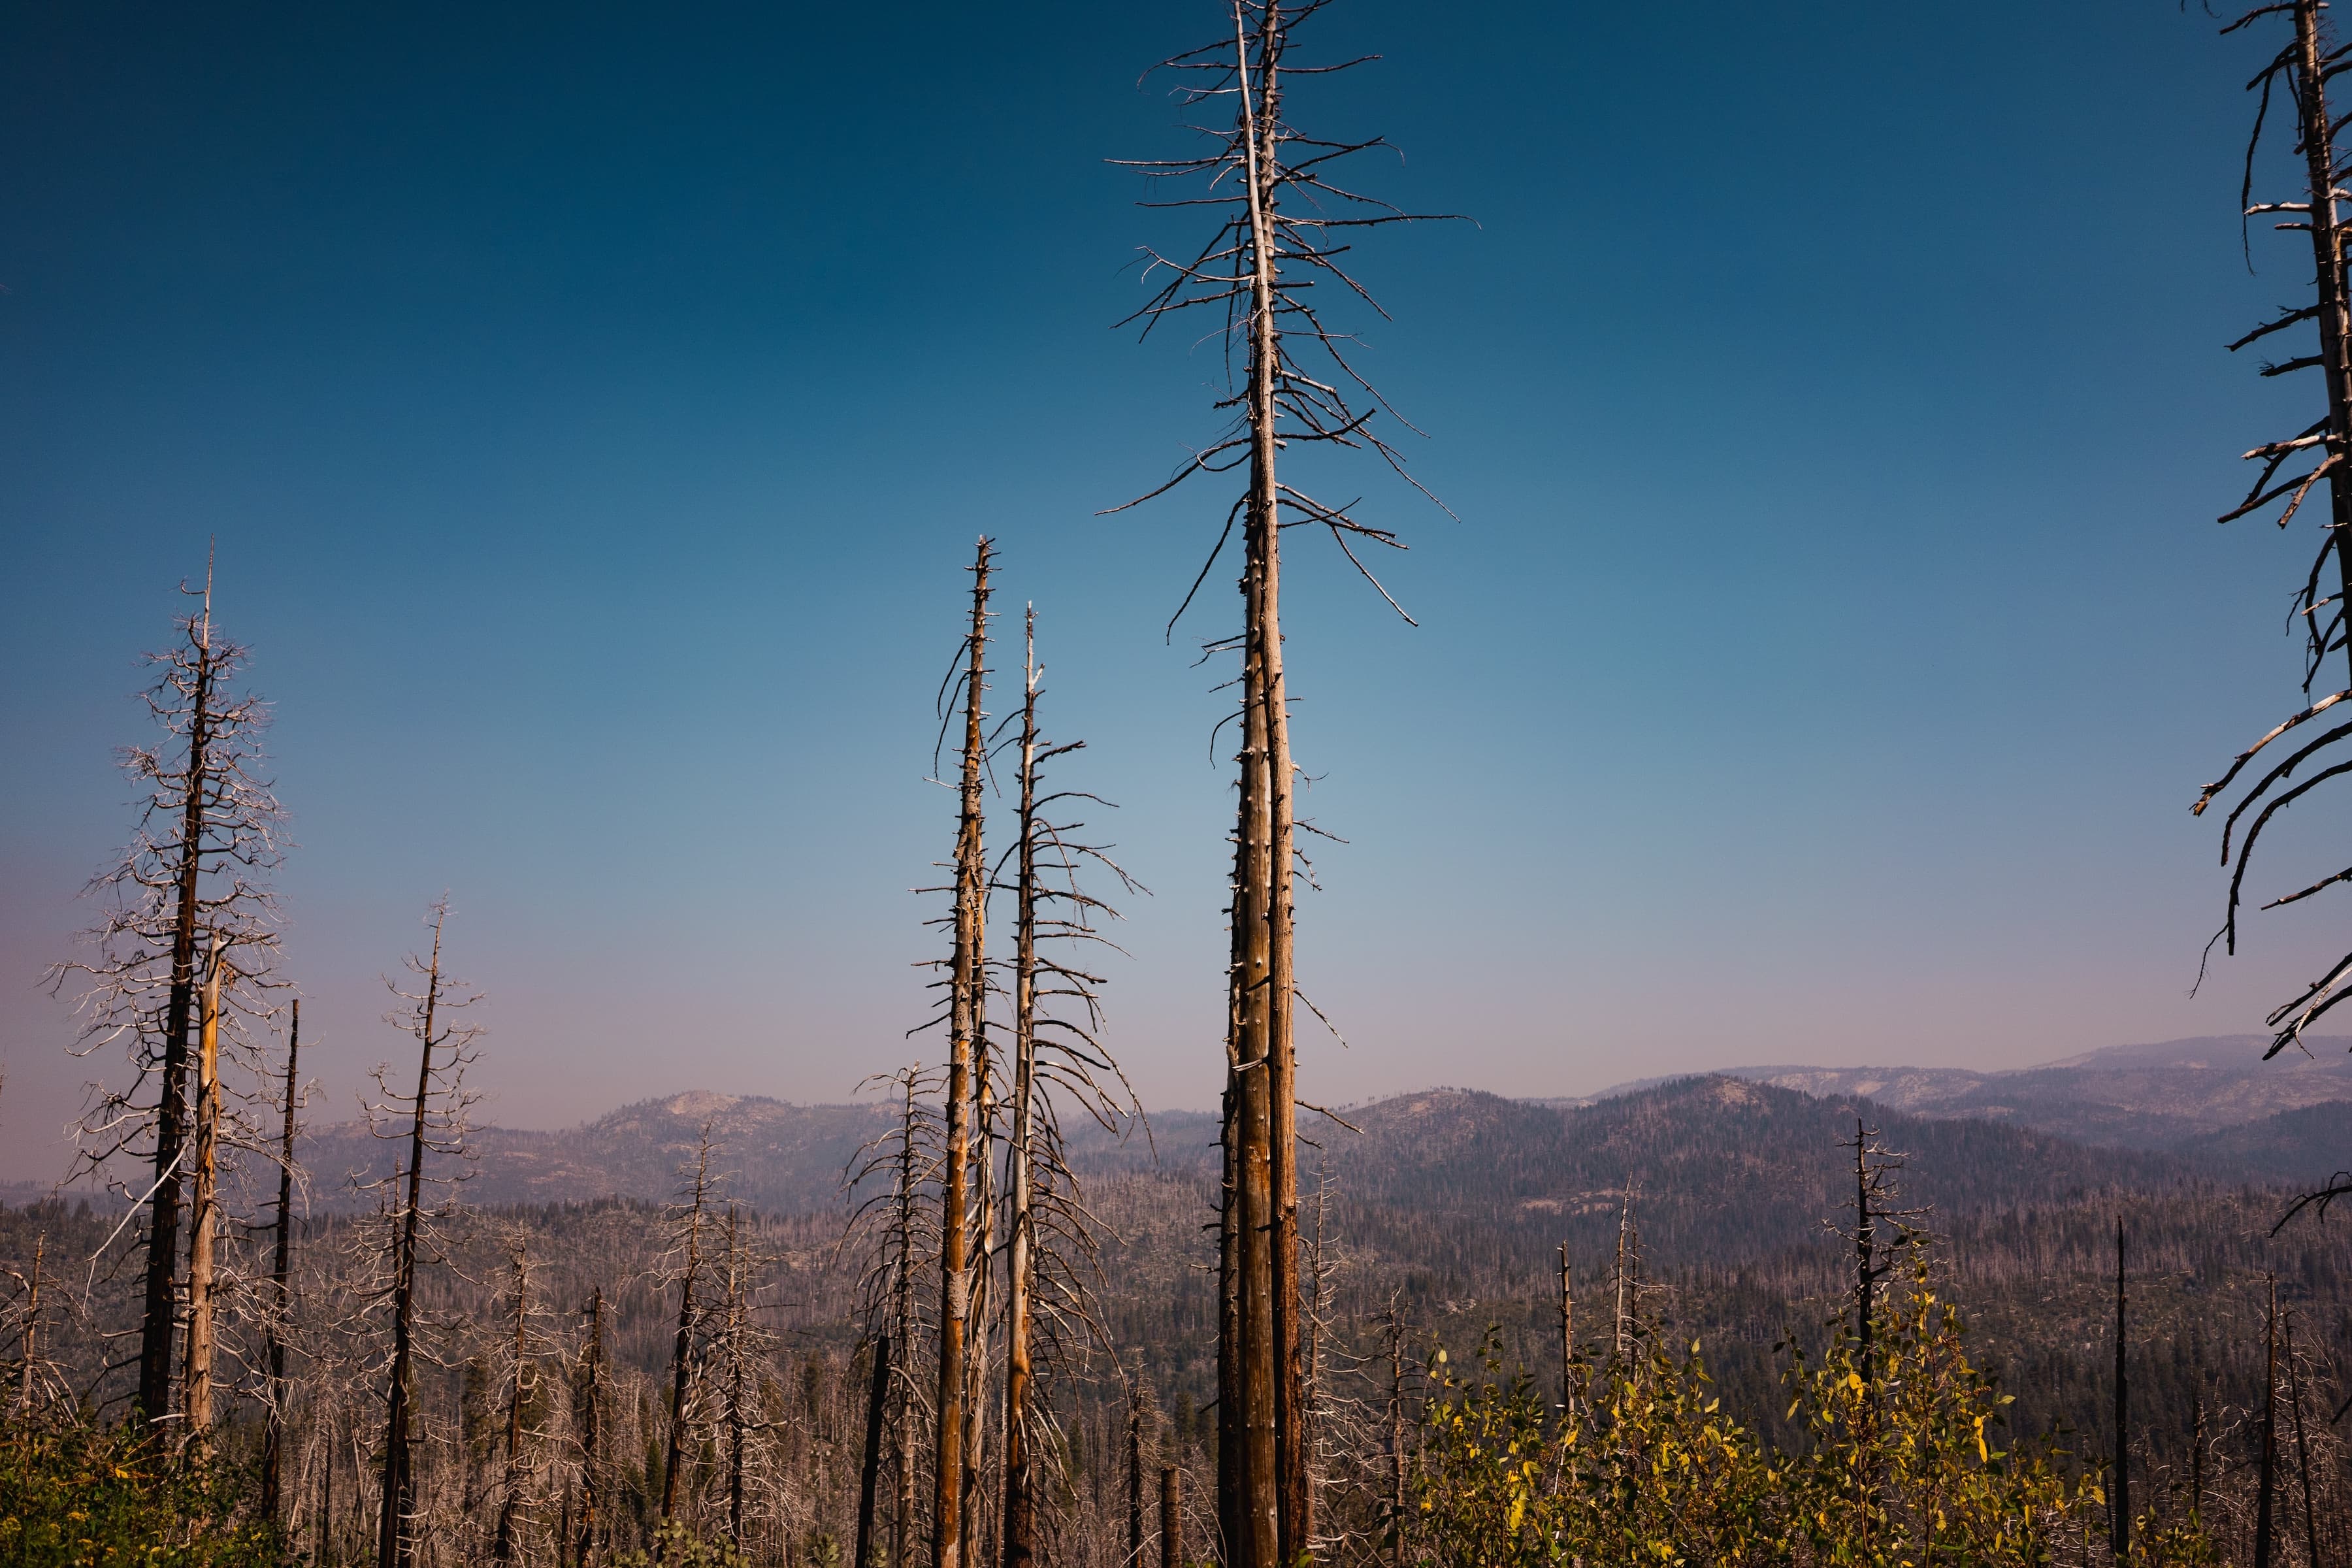 Bare, charred tree trunks standing in a forest with signs of wildfire damage under a clear blue sky, with distant hills in the background.